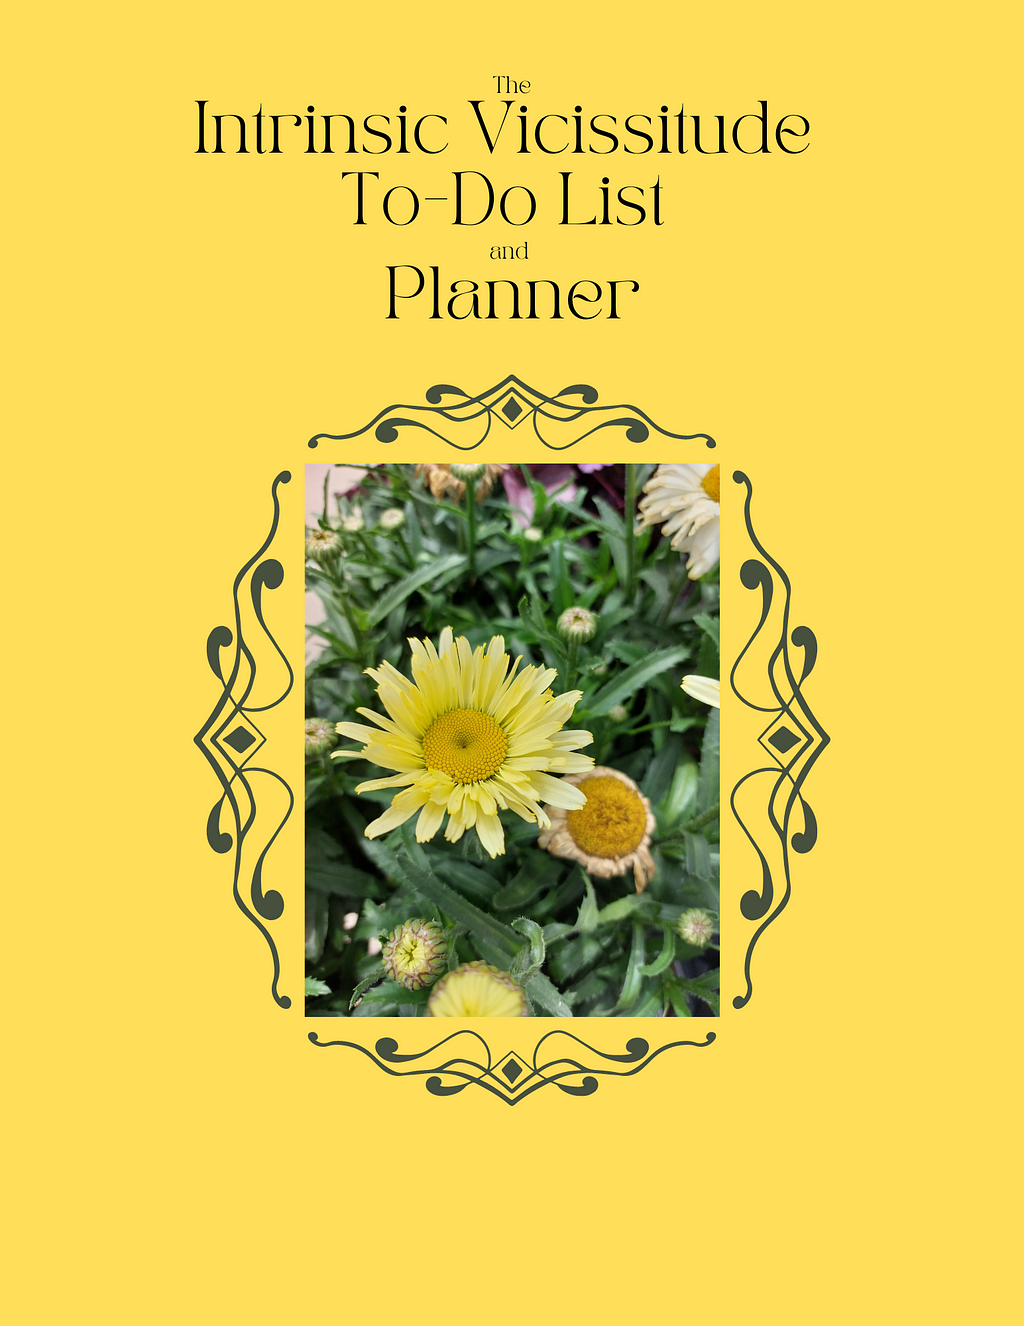 Cover of the Intrinsic Vicissitude To-Do list and Planner in bright yellow with vibrant yellow daisies.